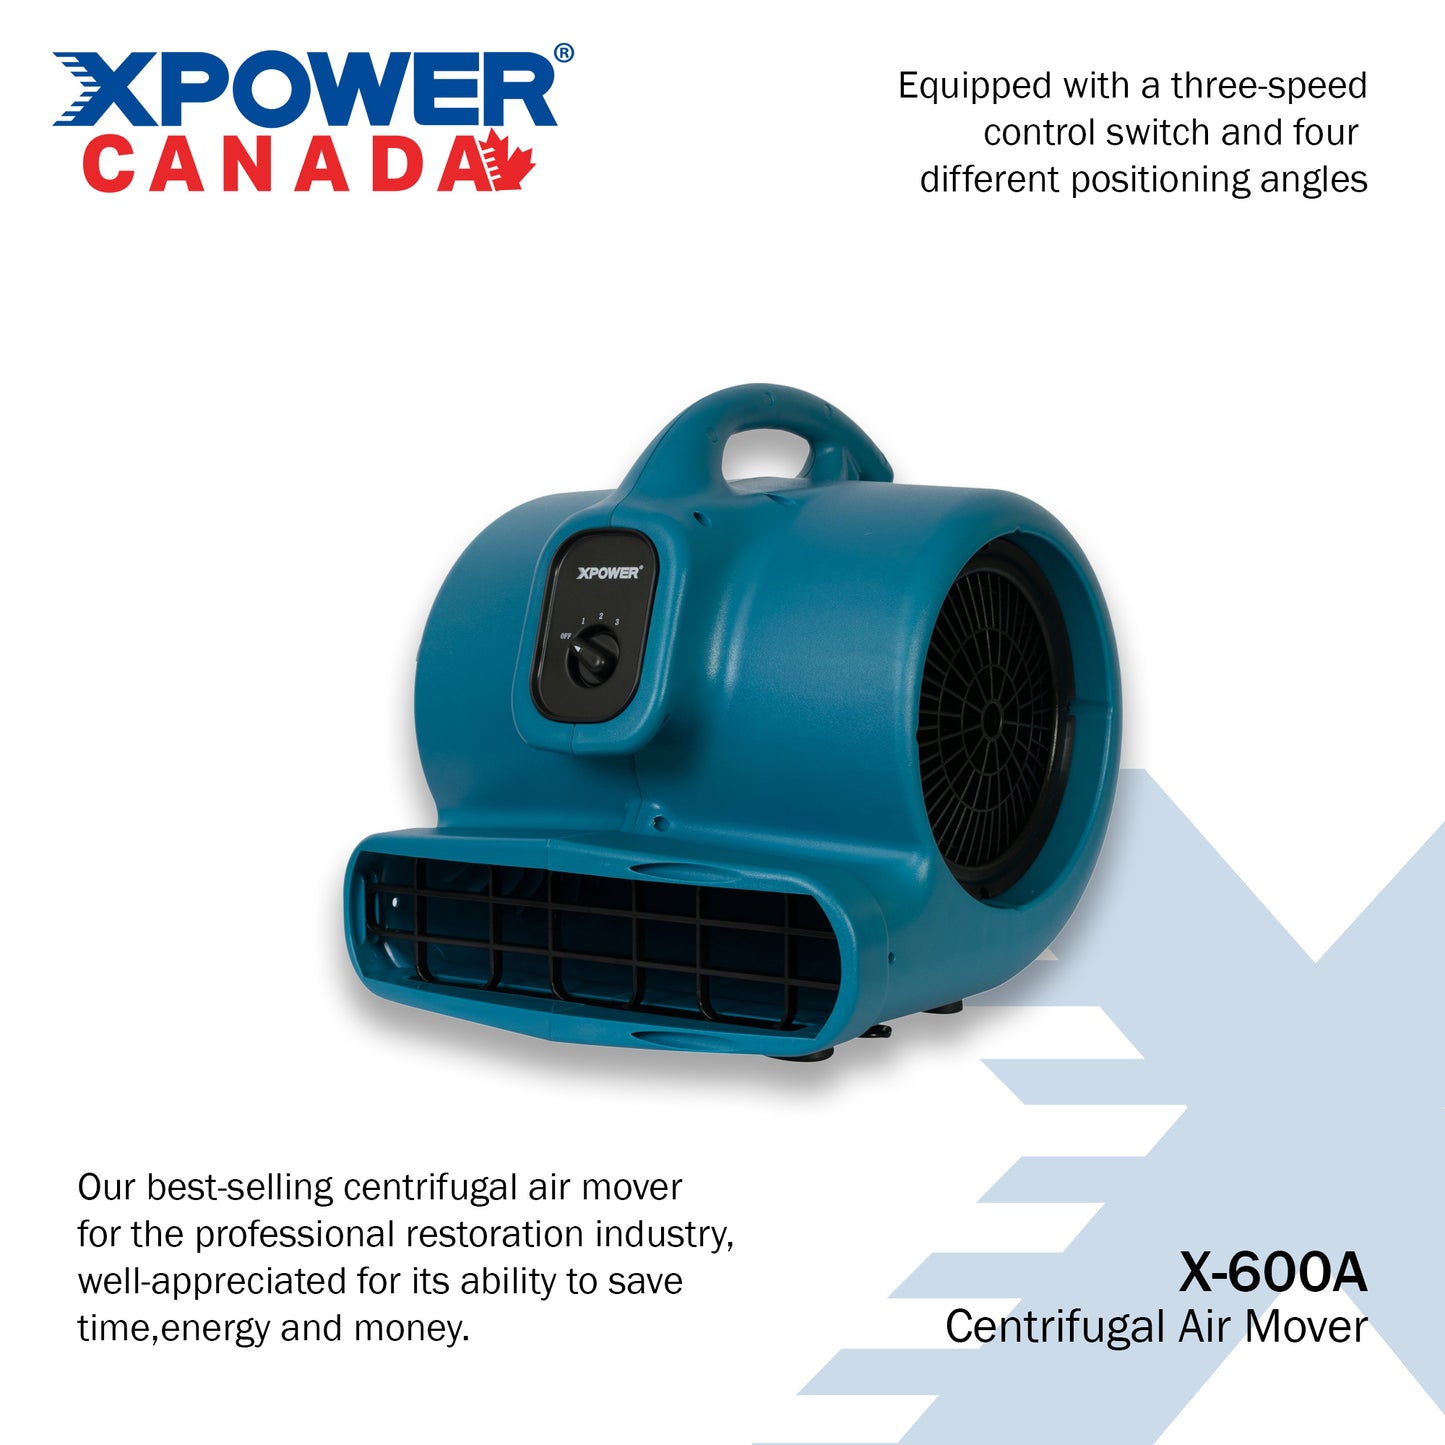 Water Damage Drying System - Extra XL Coverage